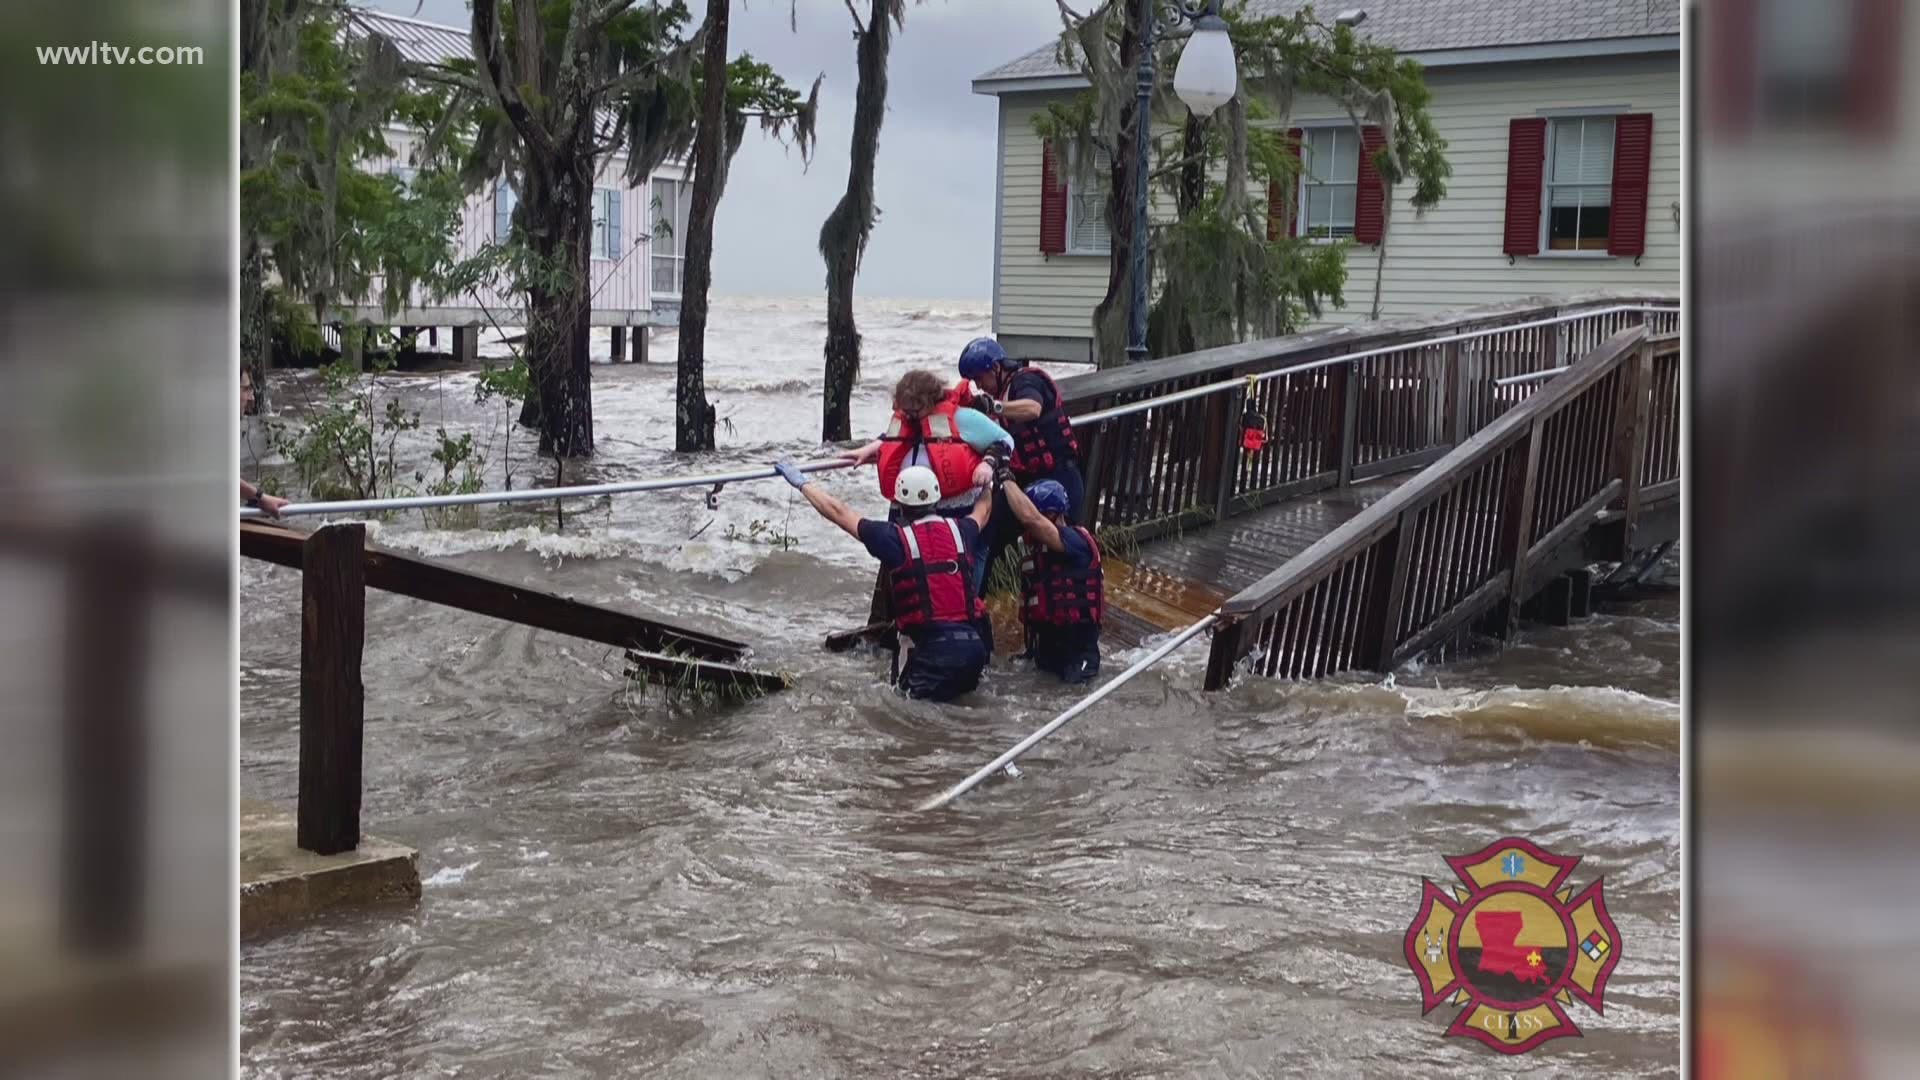 Between 10 and 12 people were rescued from a cabin that had its wooden walkway washed away by Cristobal floodwaters.